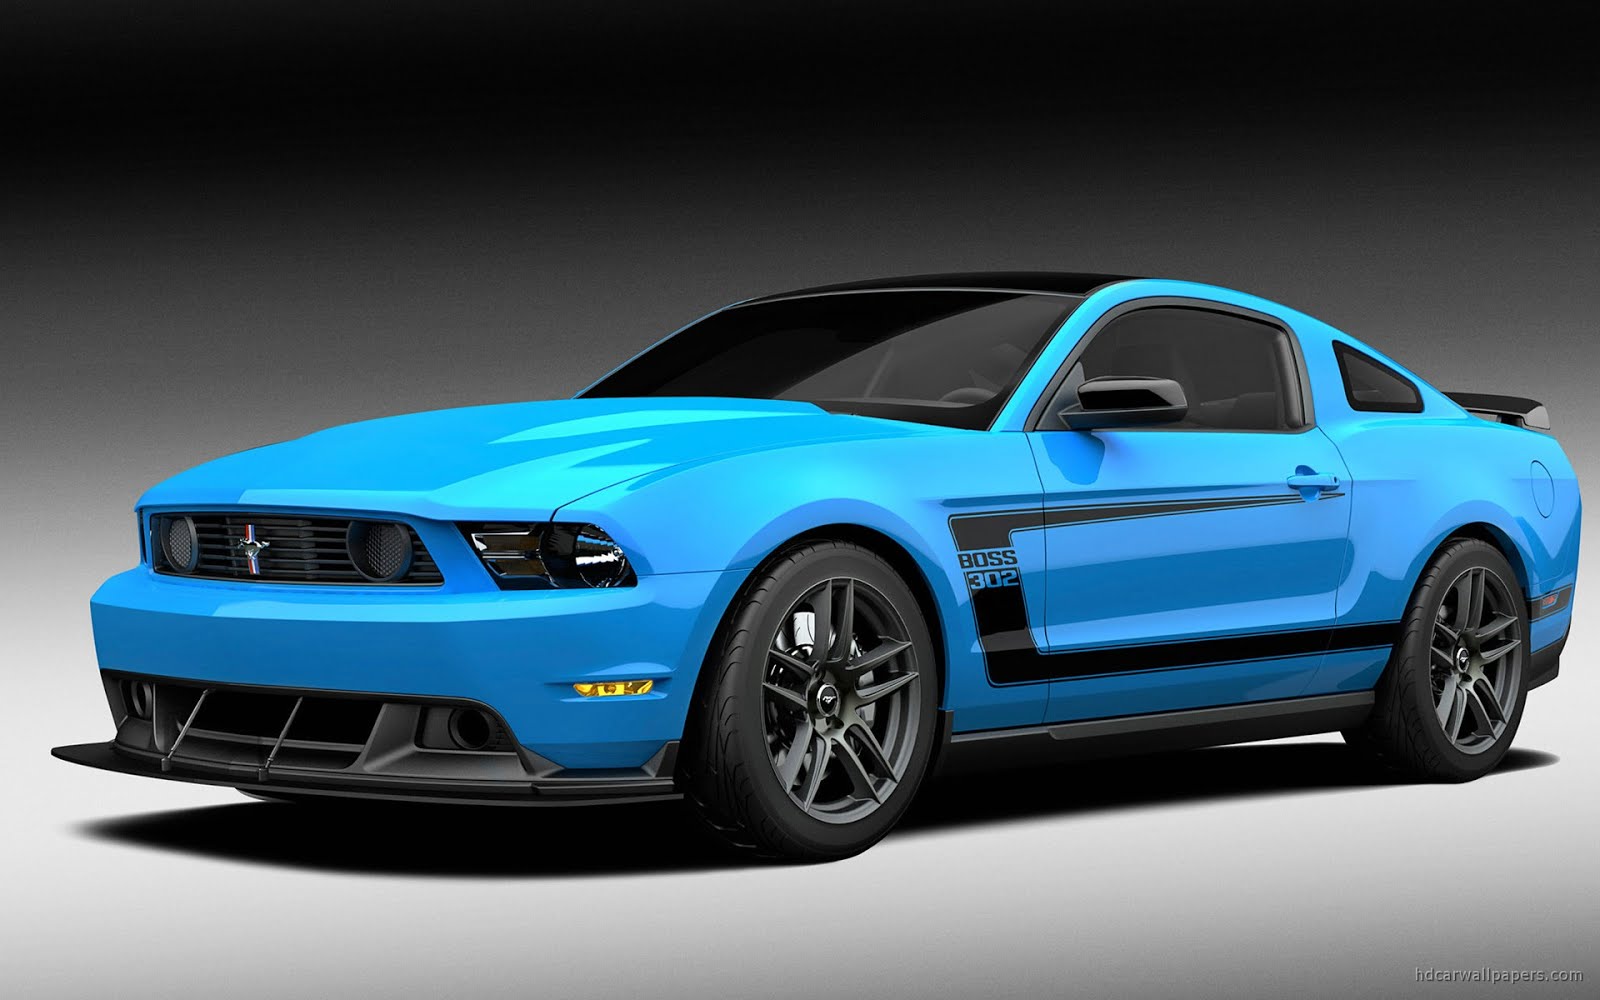 Awesome Cars Wallpaper Ford awesome car wallpapers